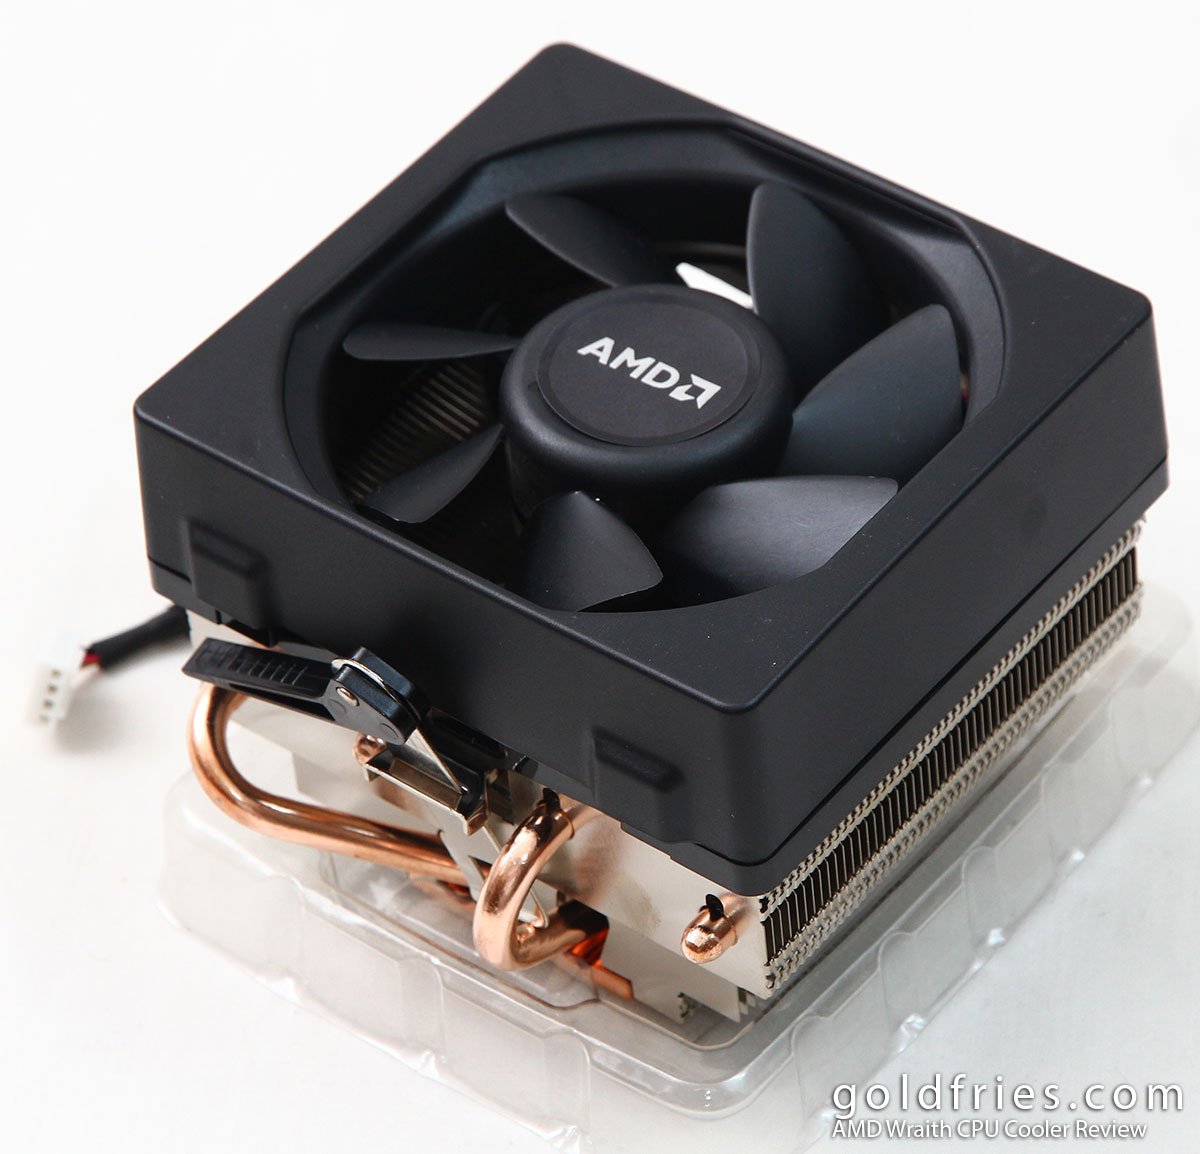 Grit Neglect Torches AMD Wraith CPU Cooler Review – goldfries